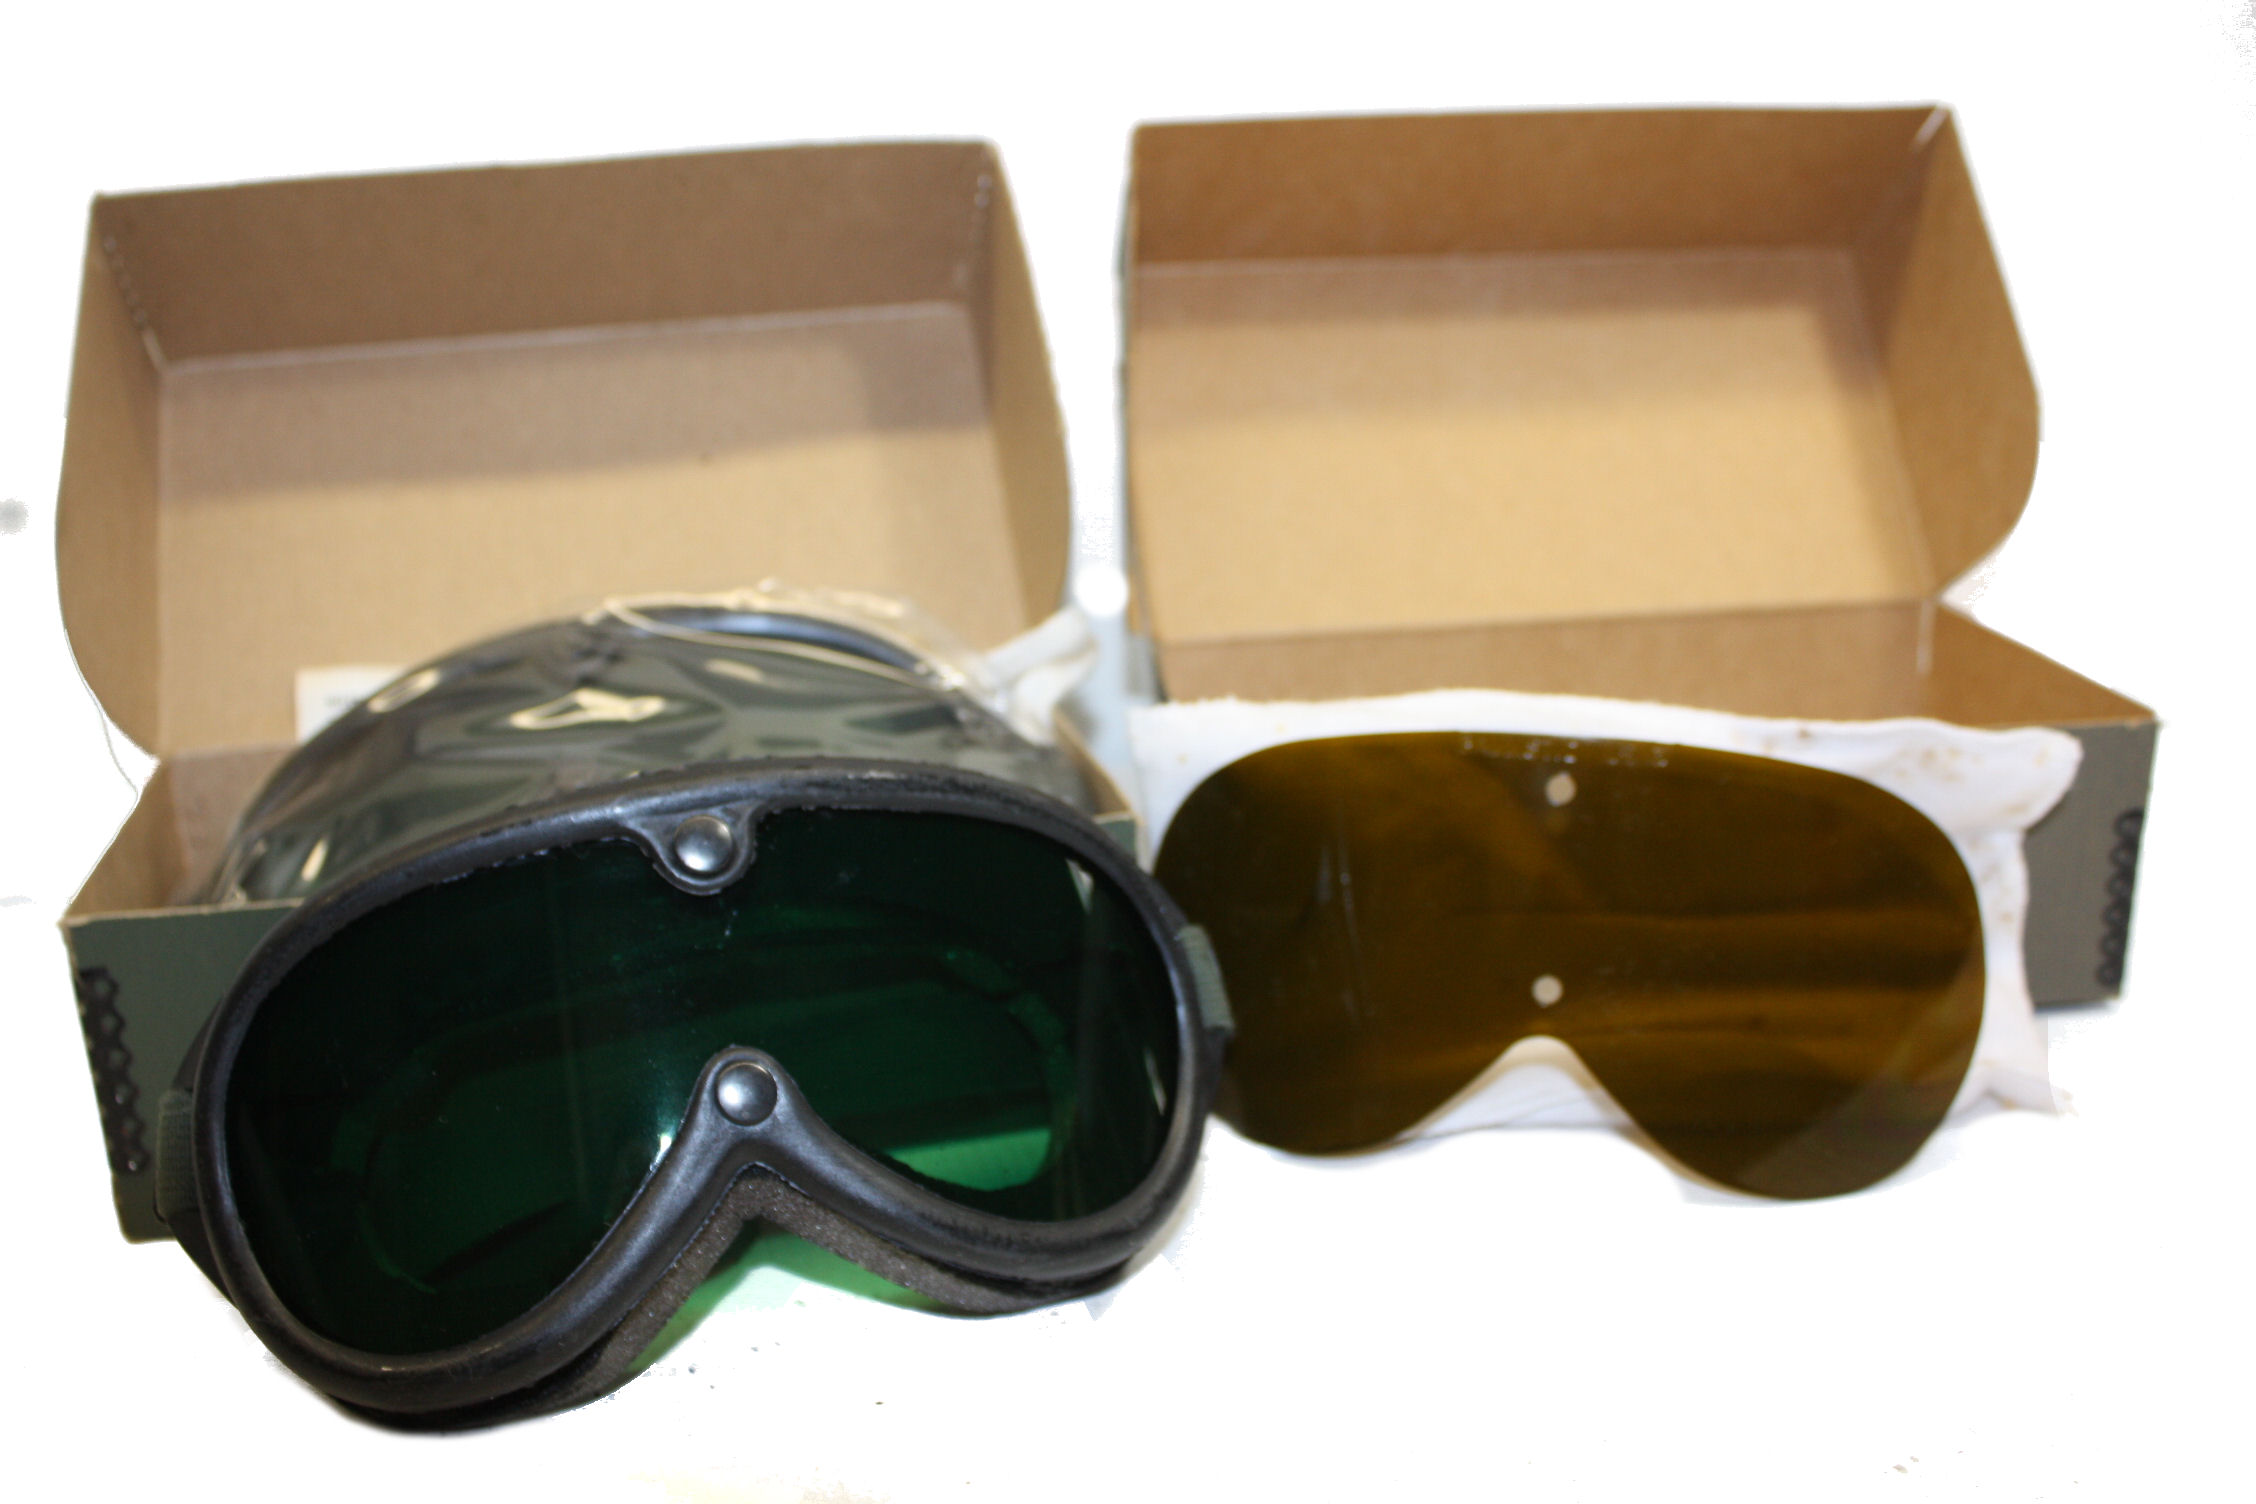 Shop Military Type Sun, Dust, Dust Goggles - Fatigues Army Navy Gear